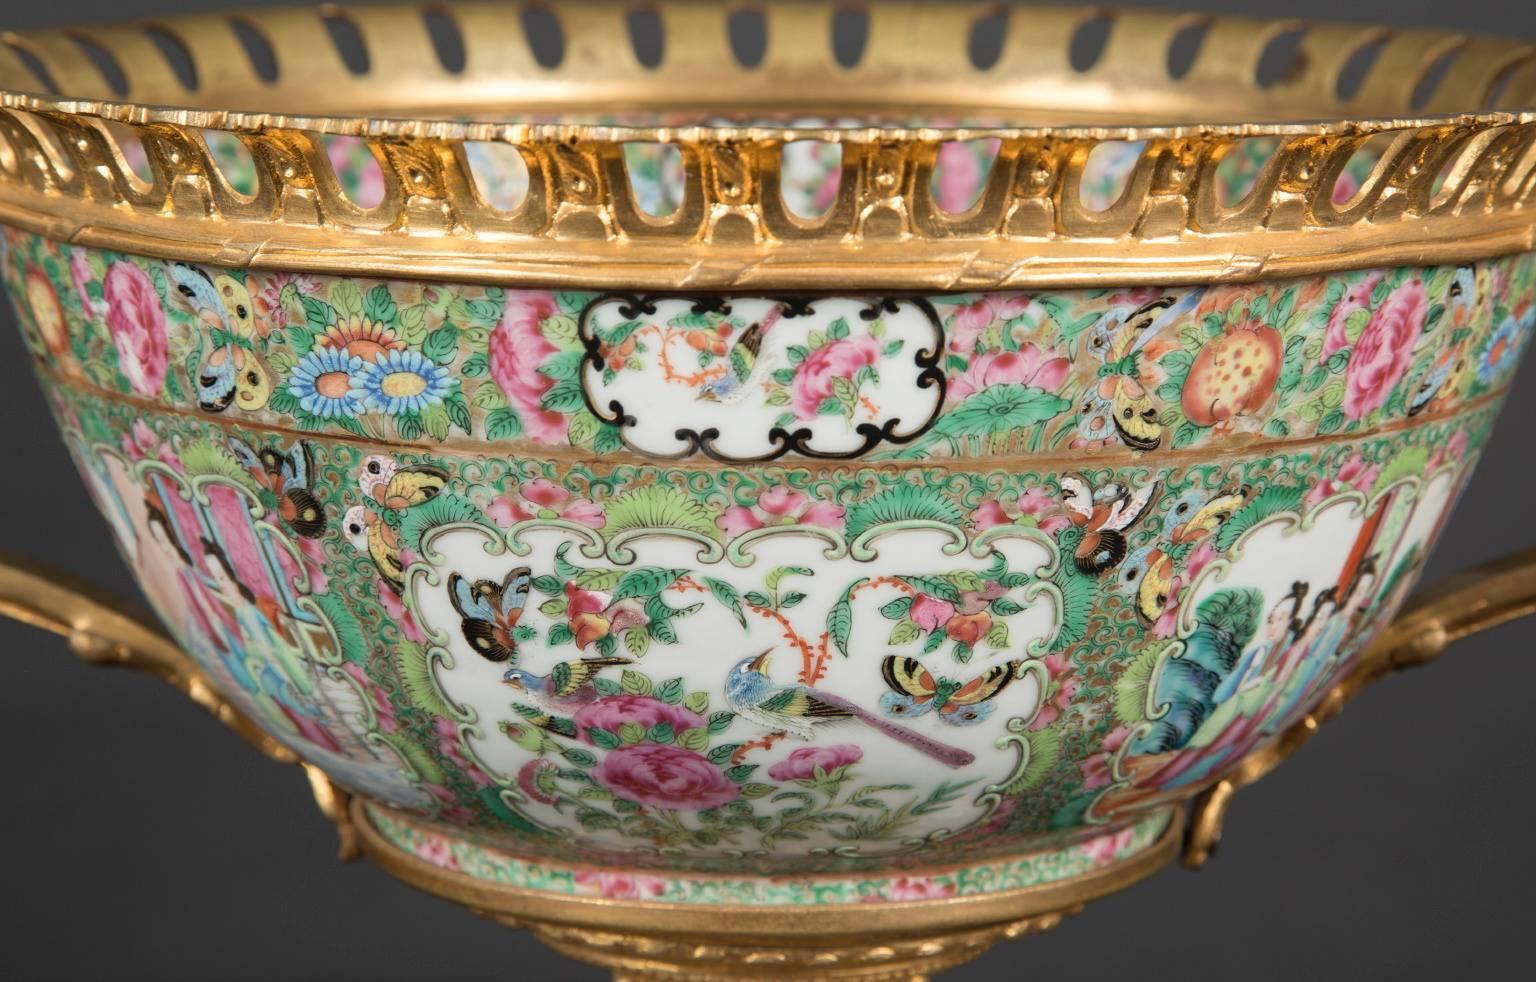 The porcelain bowl of this centerpiece was made in China and exported to France, where French craftsmen added the handles, rim, and base to it, all constructed of solid bronze. The handles are made in geometric patterns, with a wreath hanging from